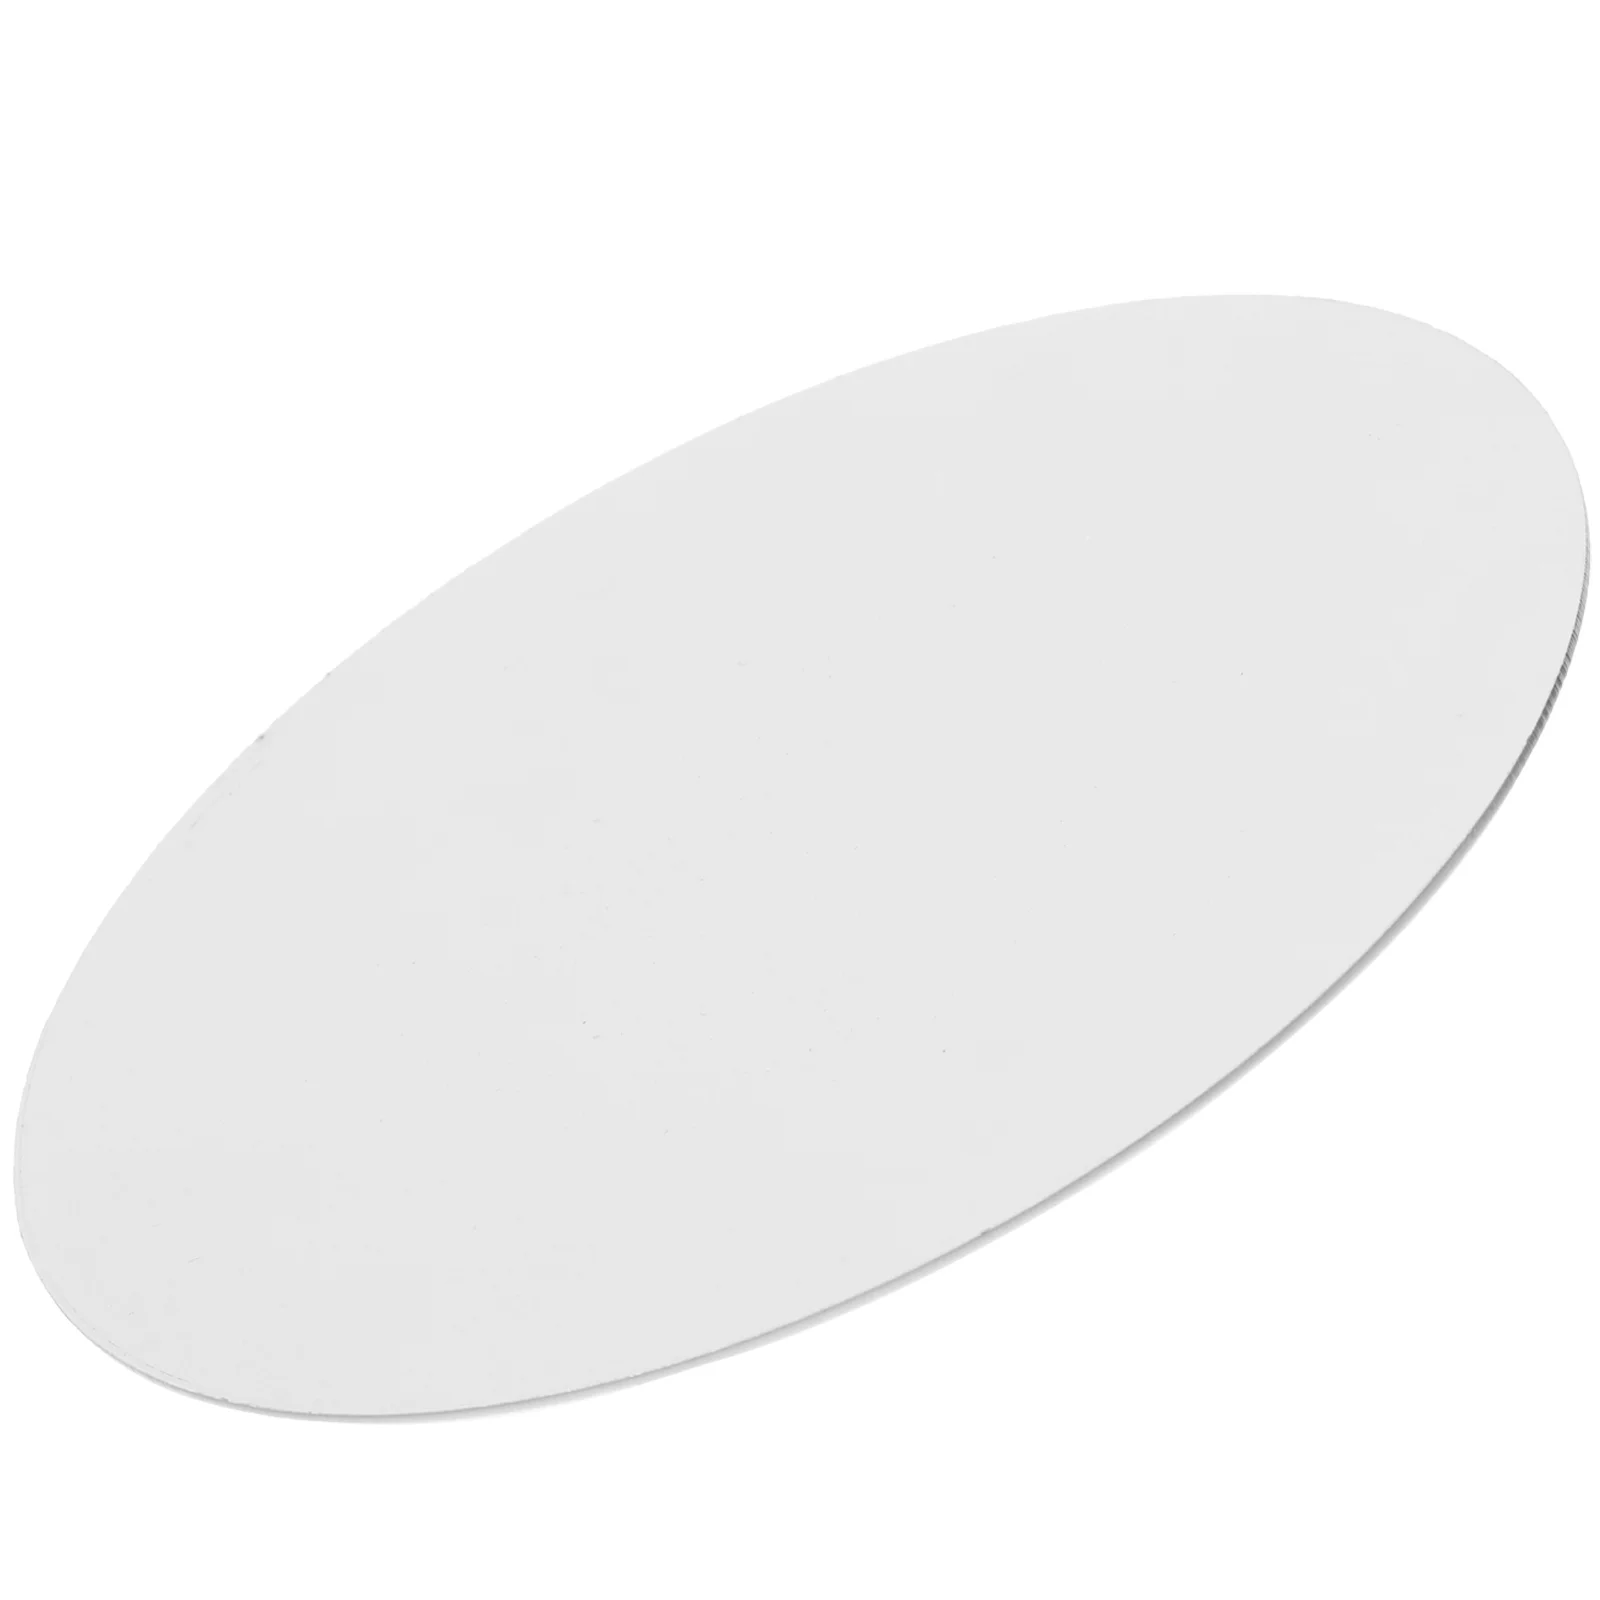 

Convex Anti-theft Mirror Lens Wide Angle Mirror Lens Corner Blind Spot Mirror Lens Garage Mirror Lens